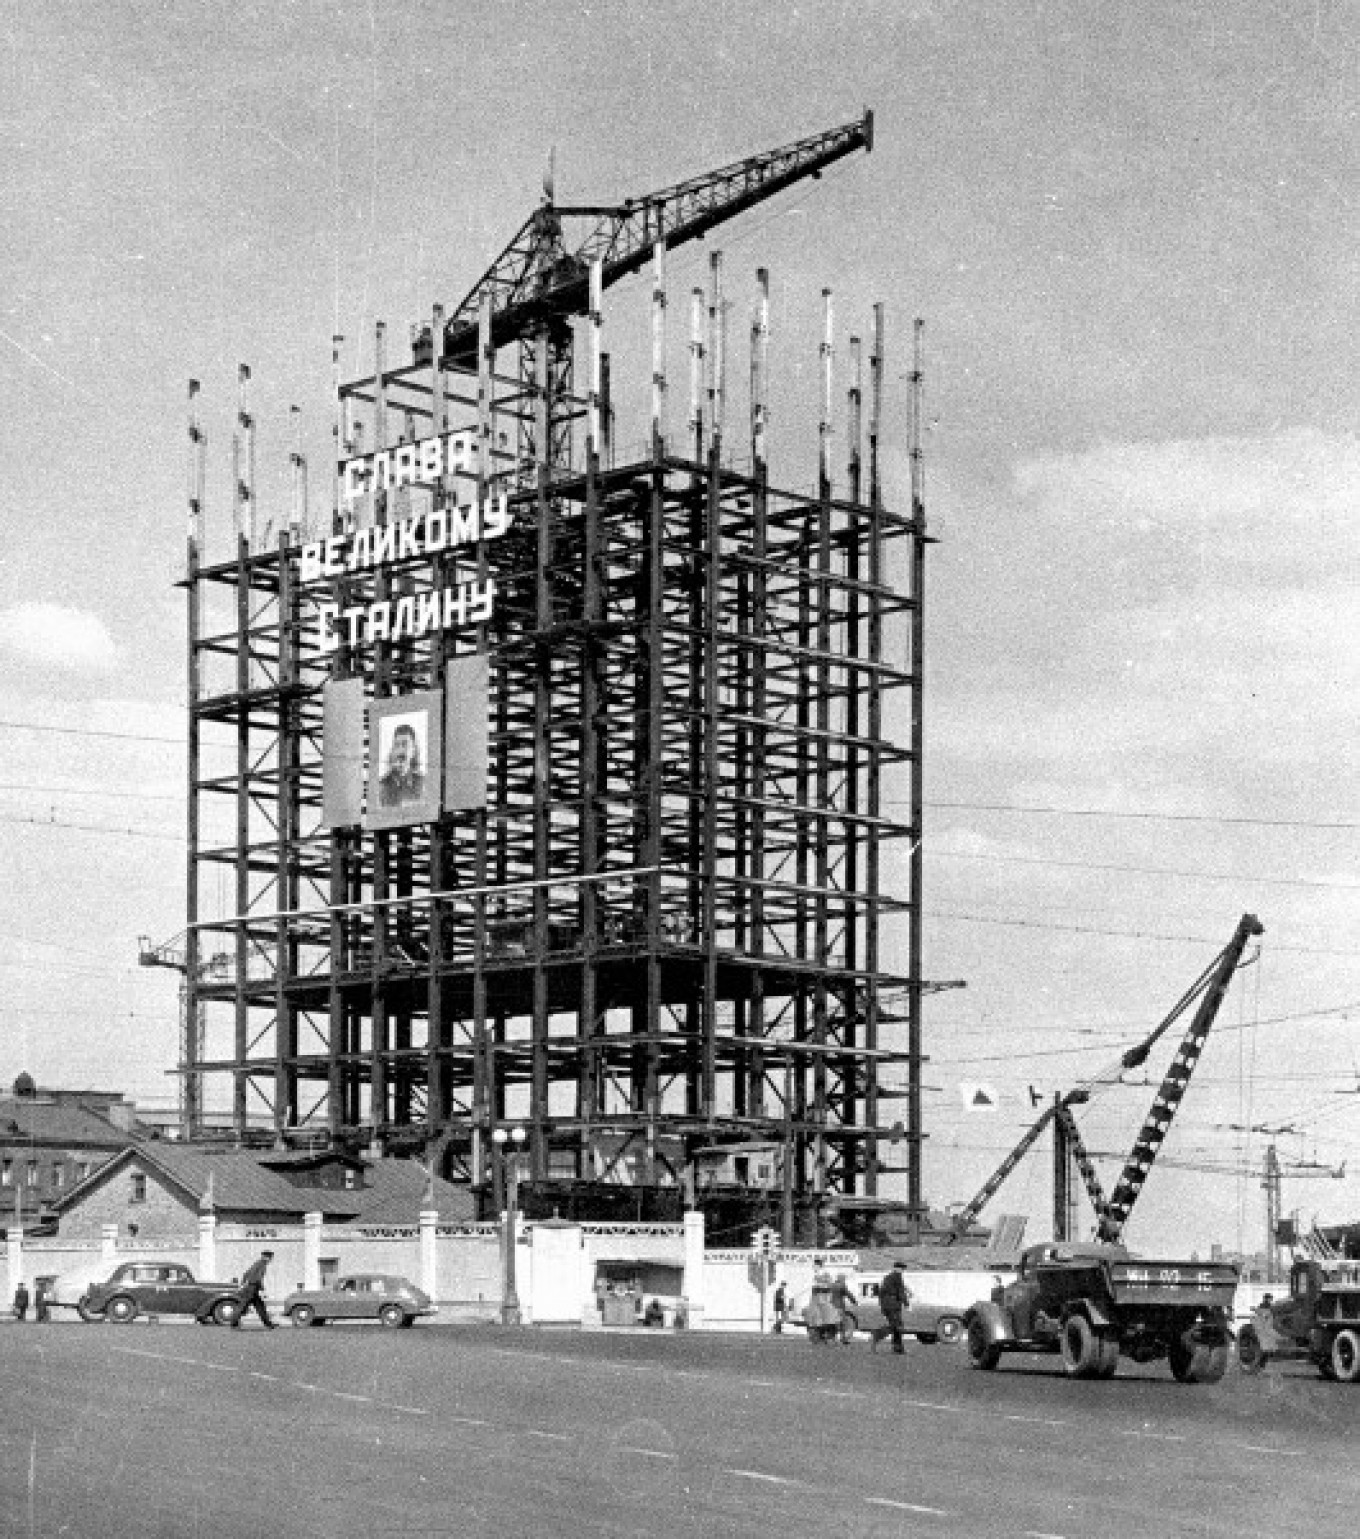  Figure 6.4: Red Gates skyscraper with banner and text reading “Glory to Comrade Stalin,” April 1950. Collection of the Shchusev State Museum of Architecture. Courtesy of "Moscow Monumental" 